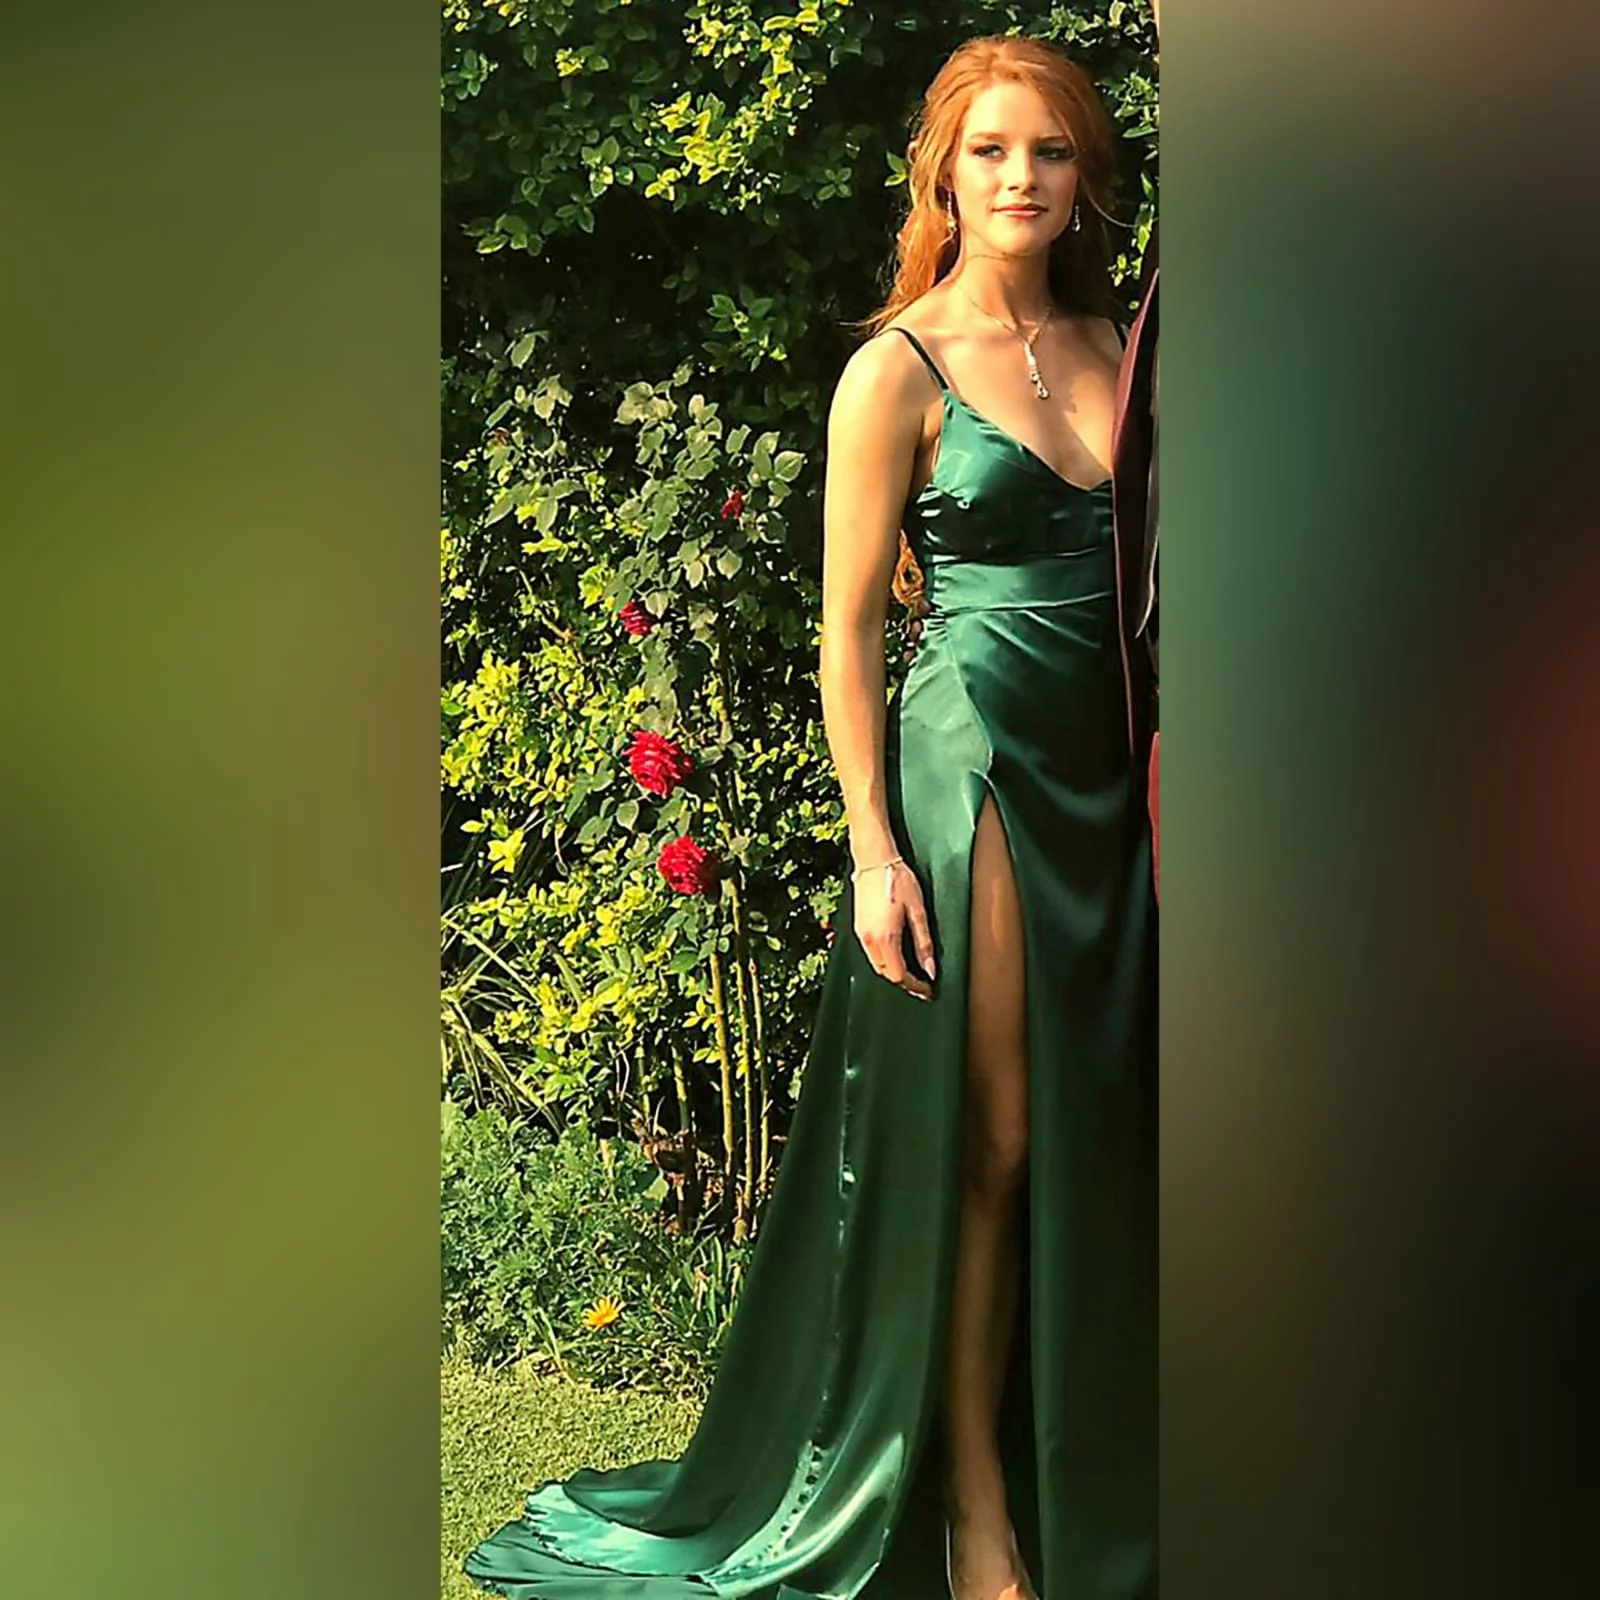 Emerald green long satin matric farewell dress 3 emerald green long satin matric farewell dress. With a high crossed slit and a train.